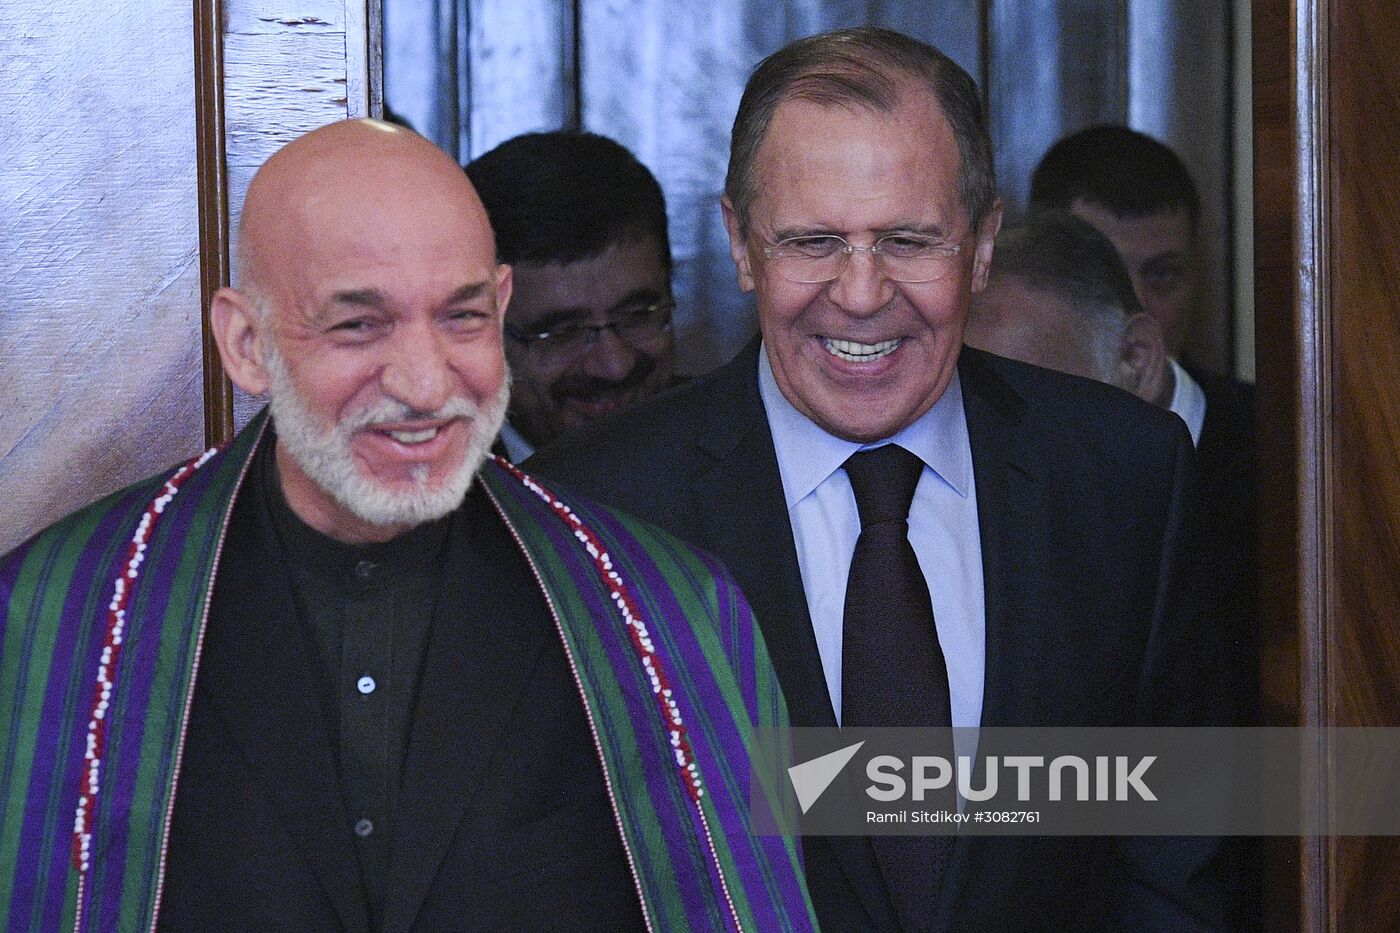 Russian Foreign Minister Sergei Lavrov meets with former President of Afghanistan Hamid Karzai